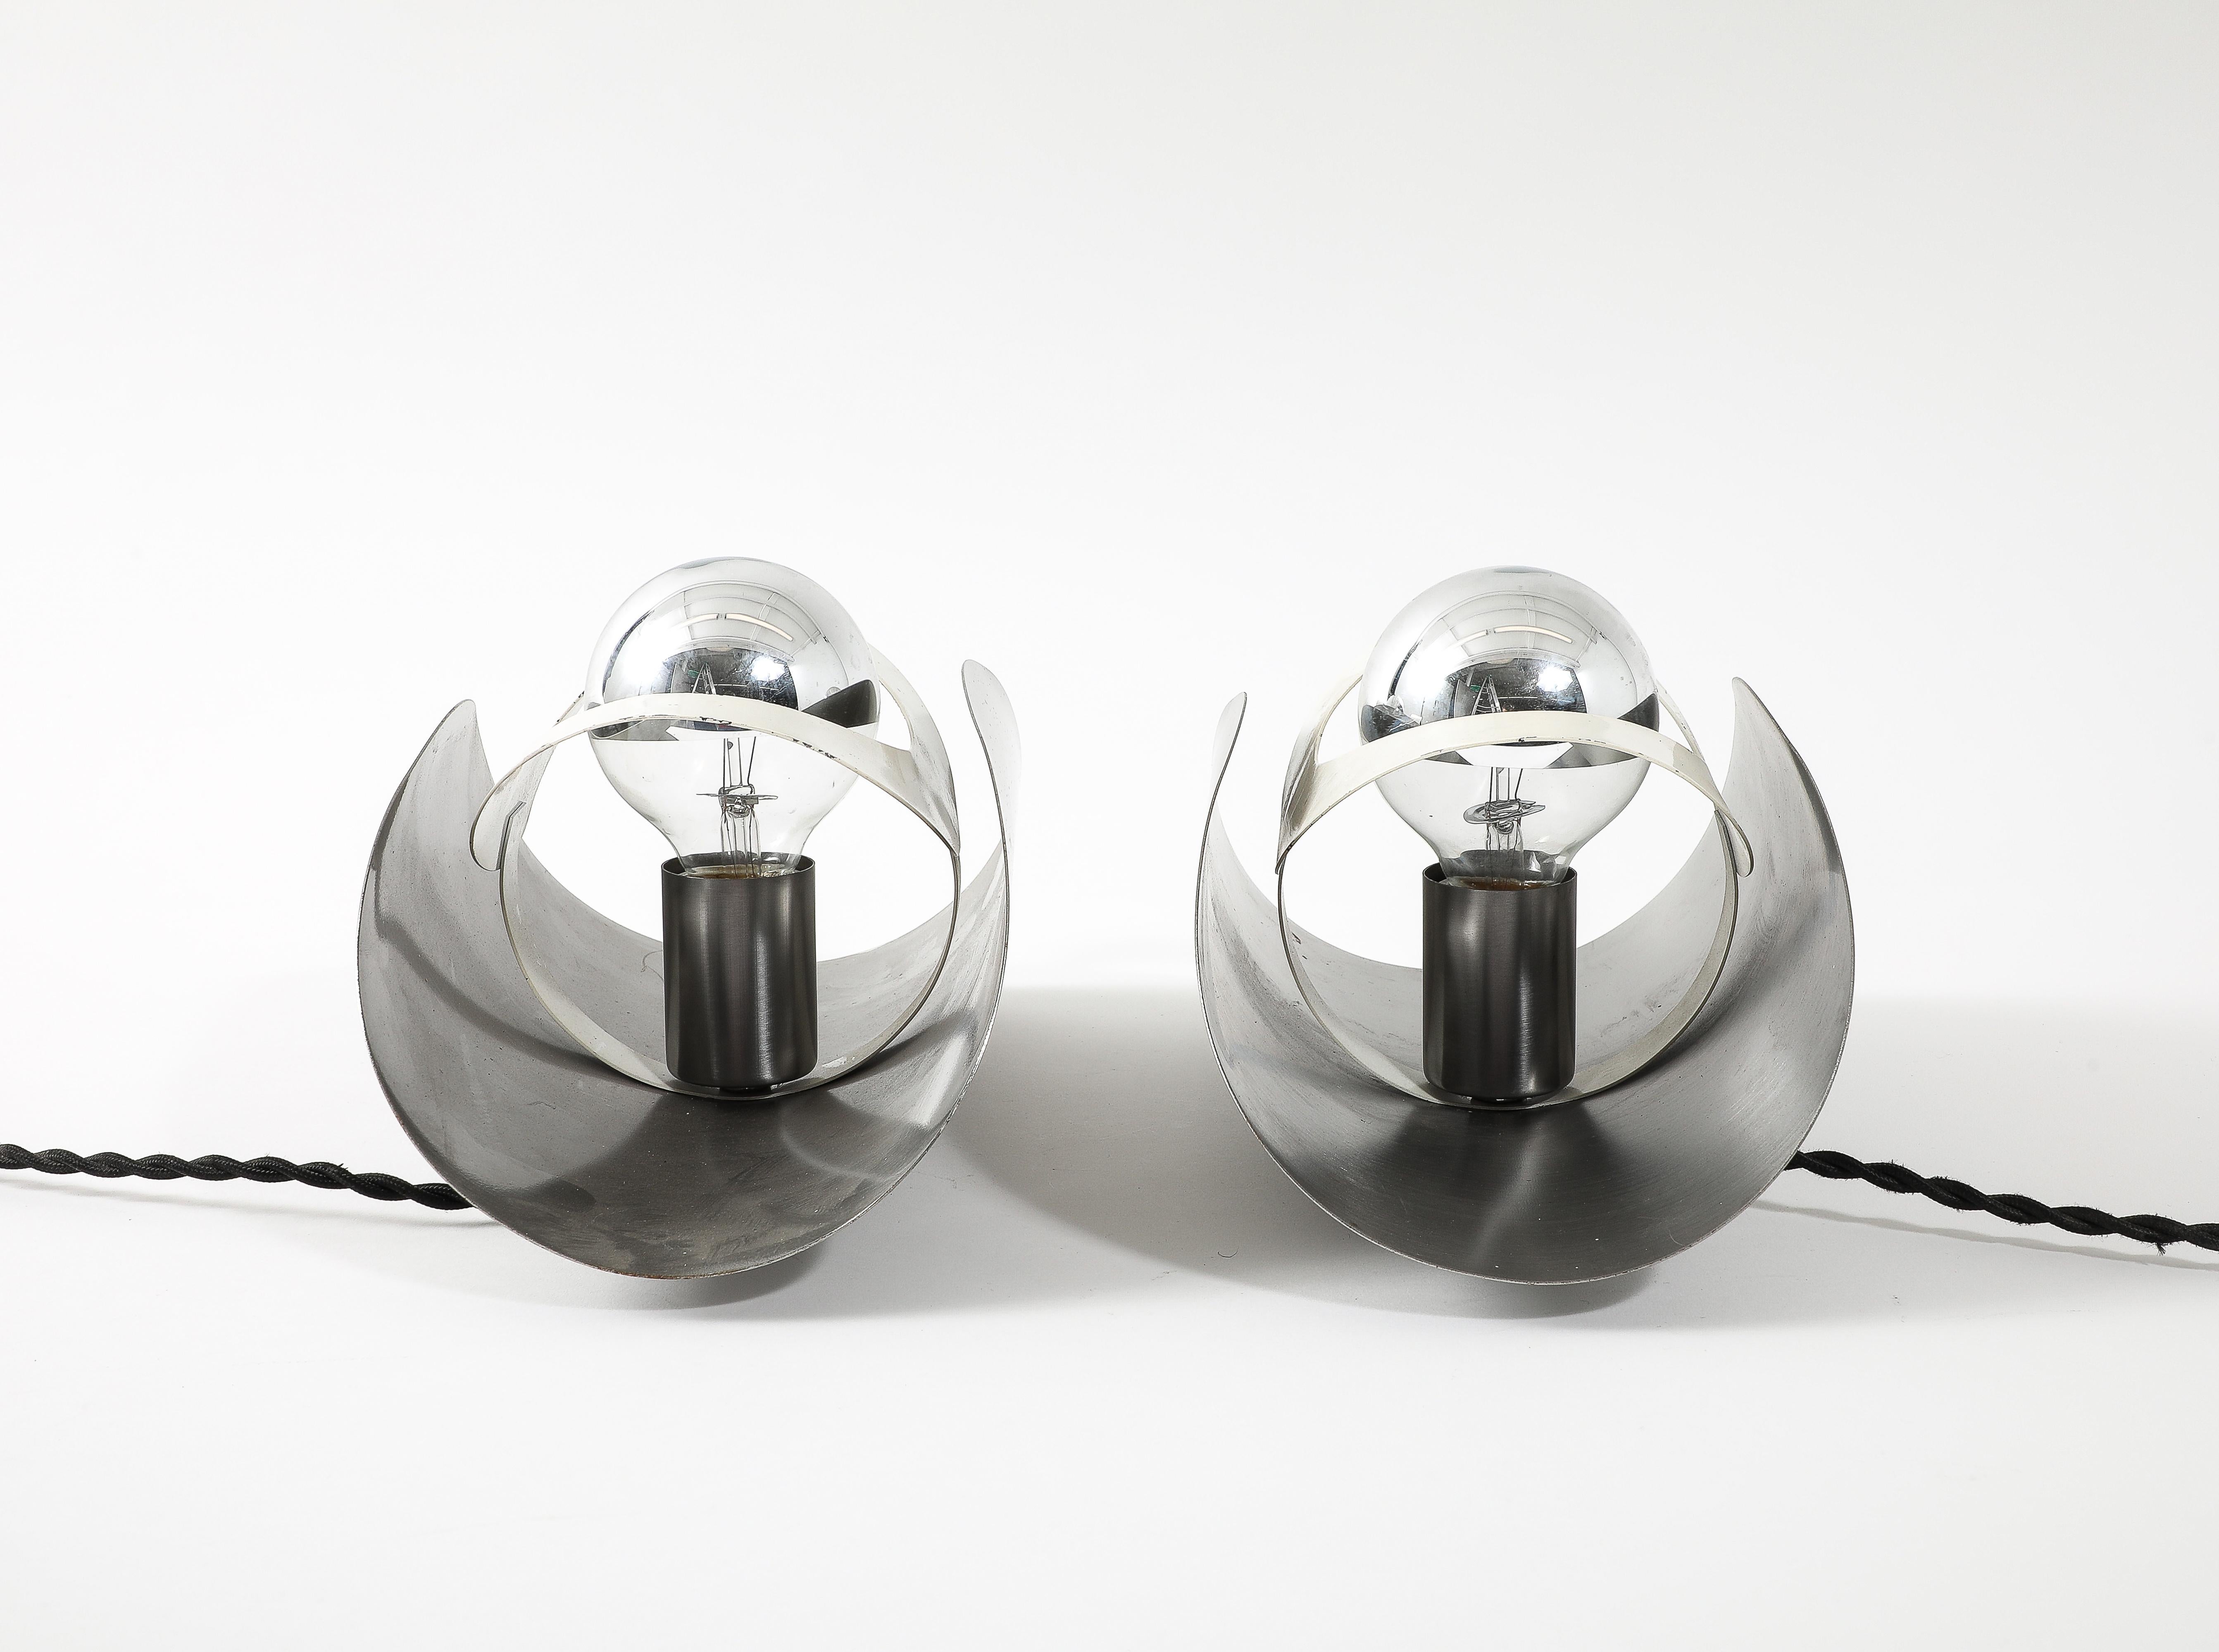 Pair of Large Space Age Chrome & White Enamel Sconces, France 1960’s For Sale 1